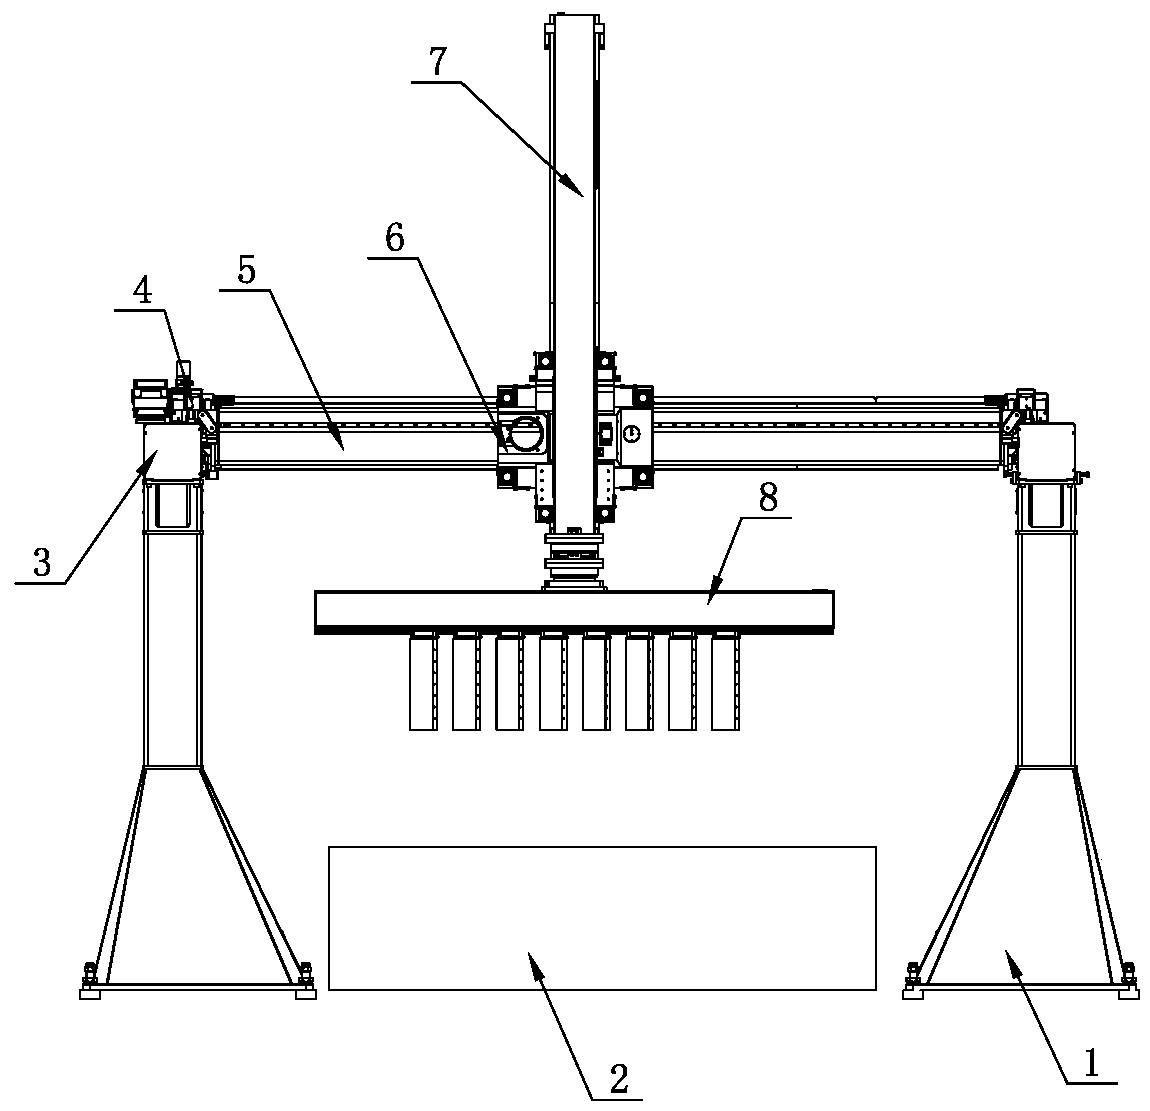 Apparatus and method for processing vacuum glass